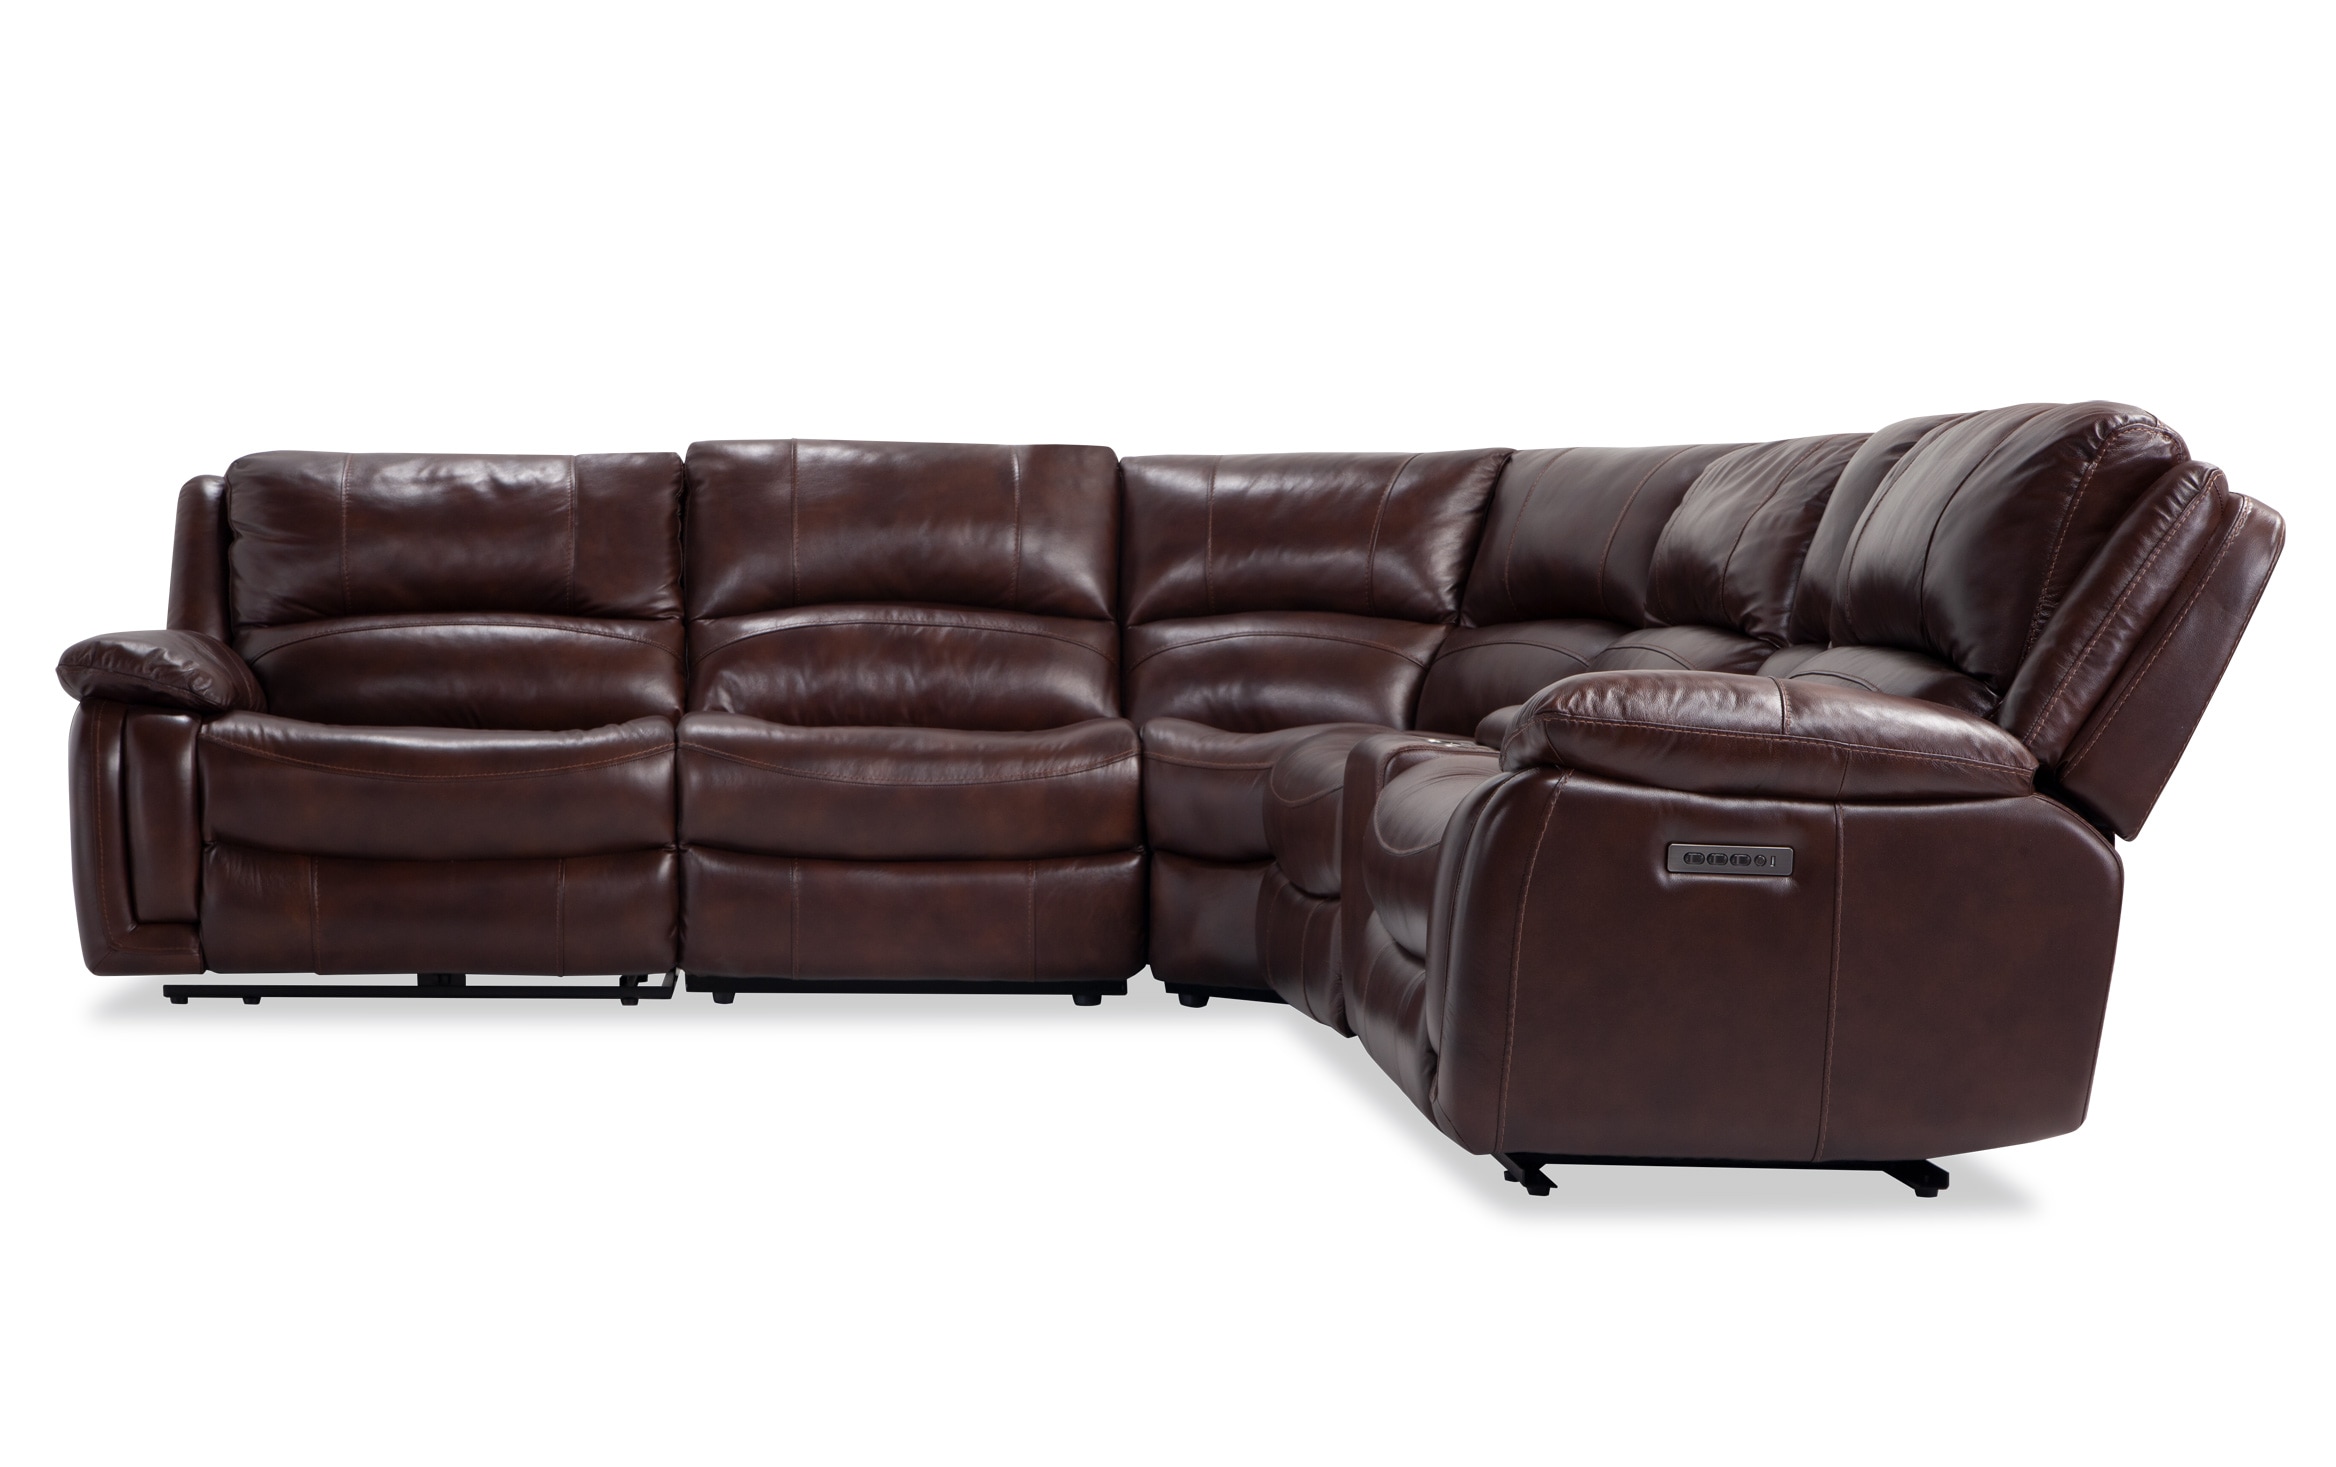 6 Piece Power Reclining Sectional, Brown Leather Couch Recliner Set